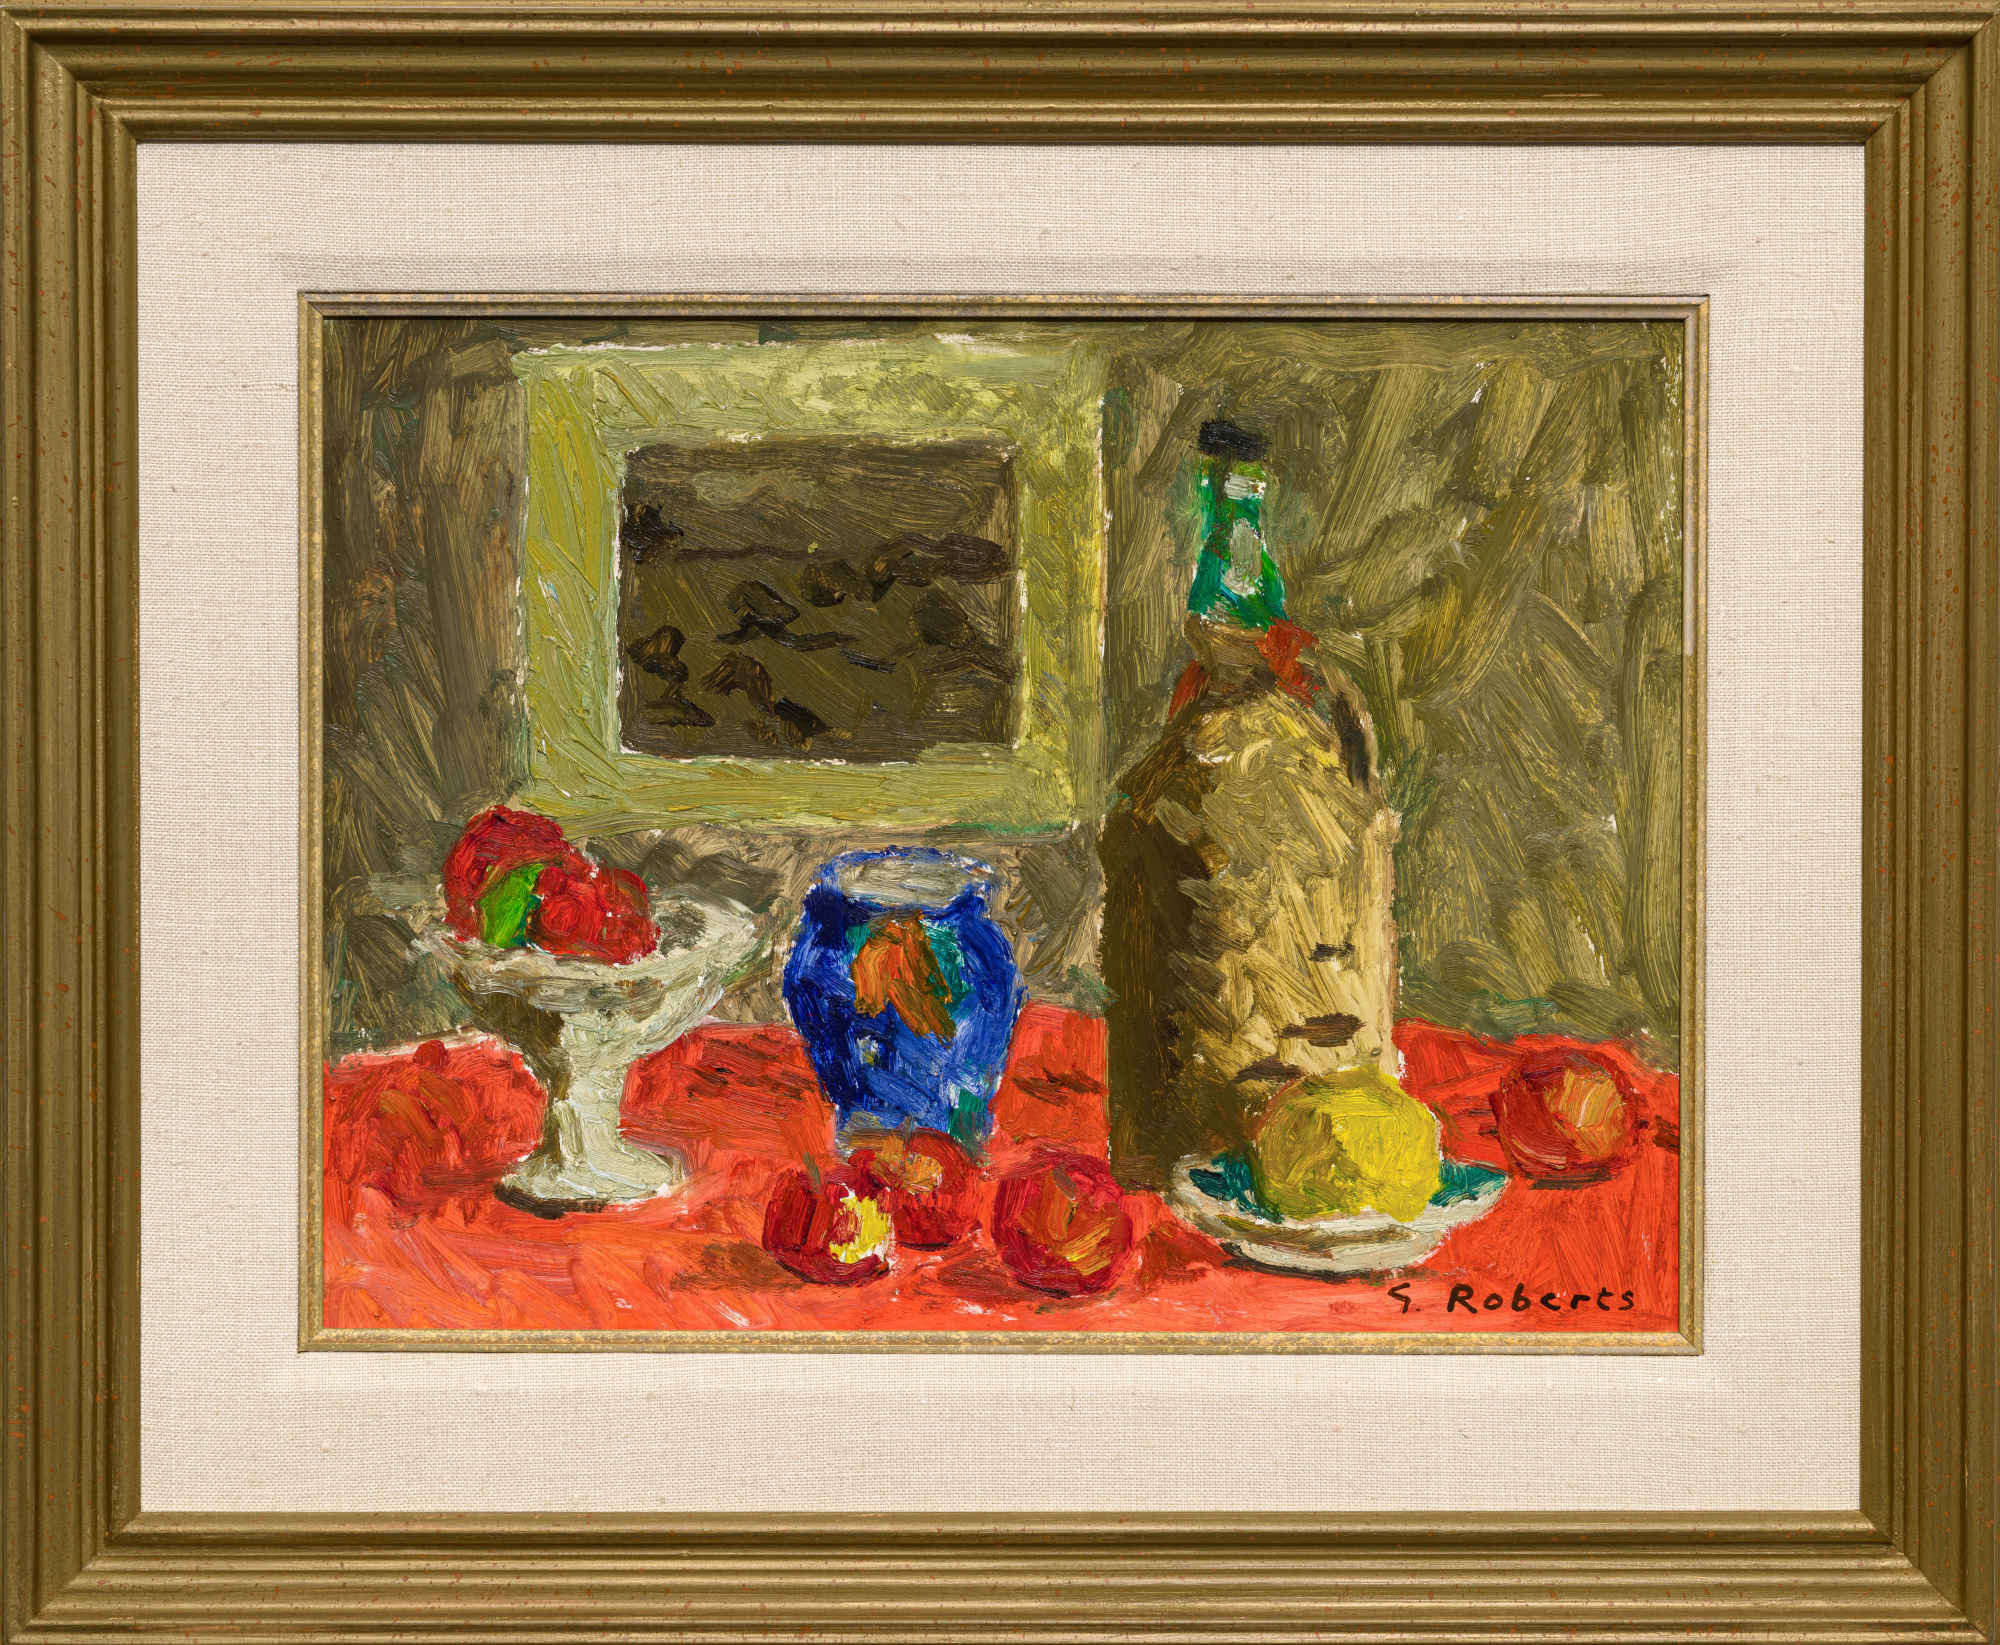 Still Life with Bottle